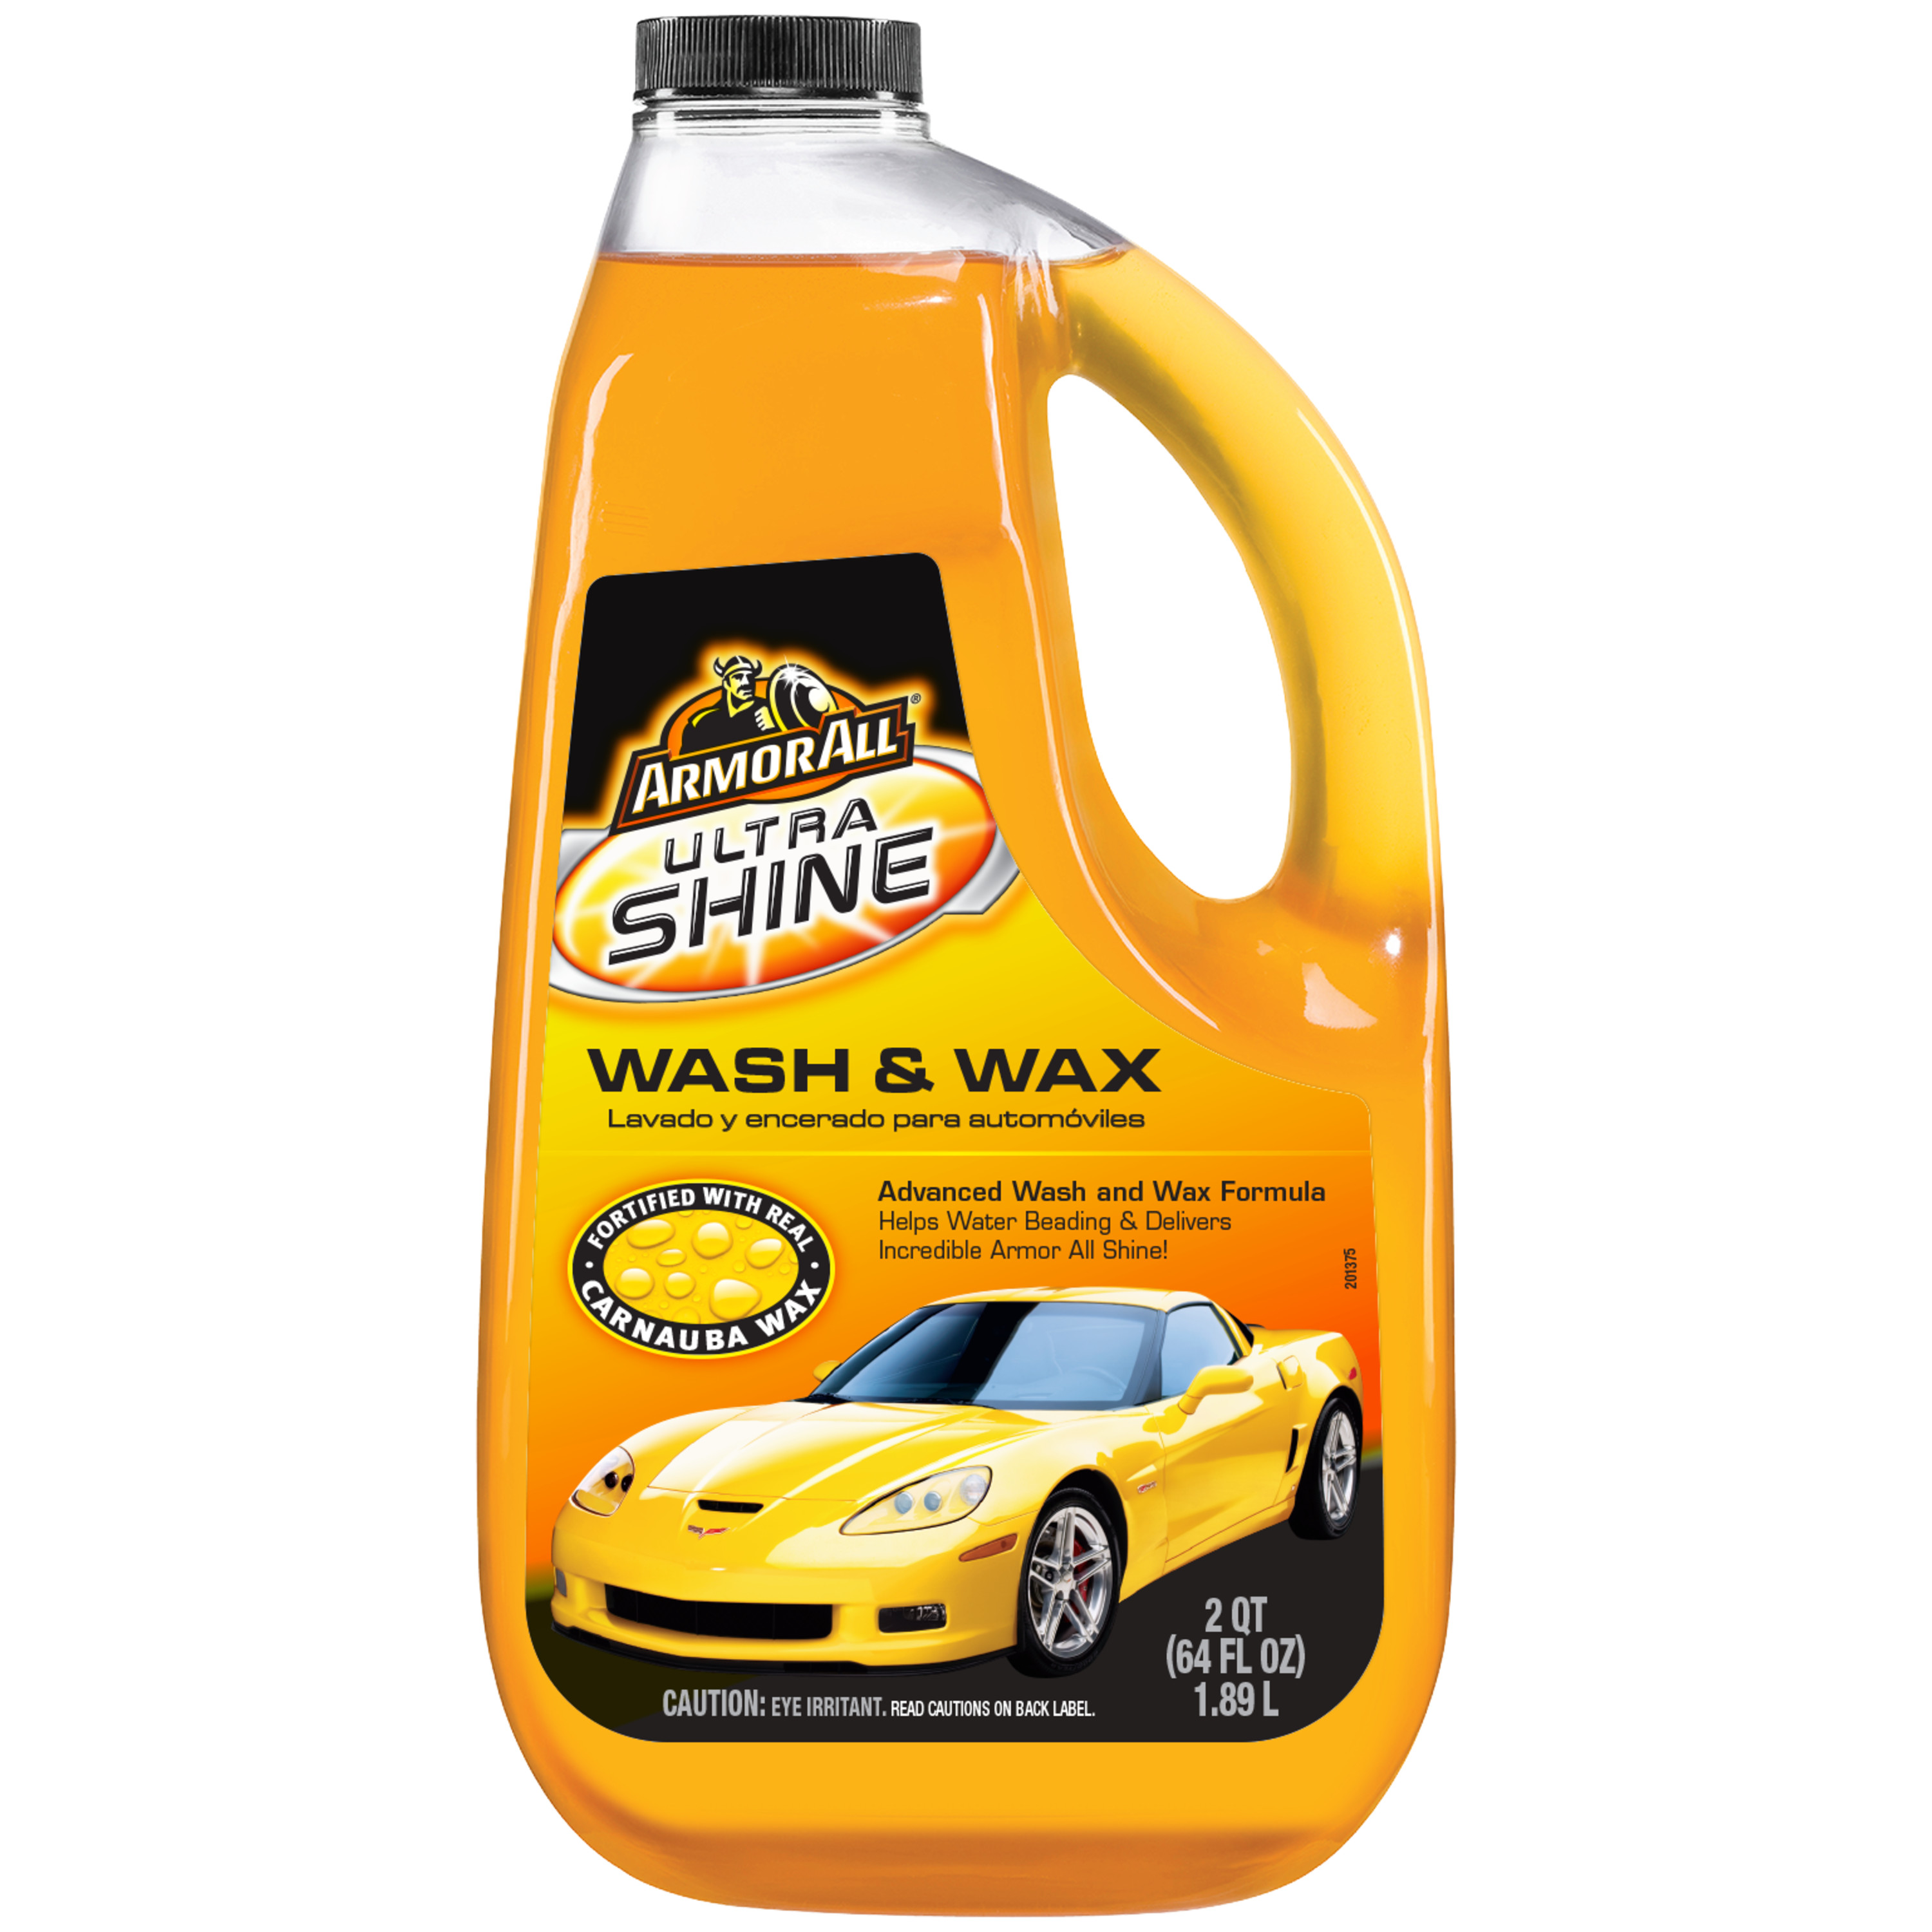 Armor All Ultra Shine Wash and Wax - 64 FL OZ Bottle - image 1 of 12